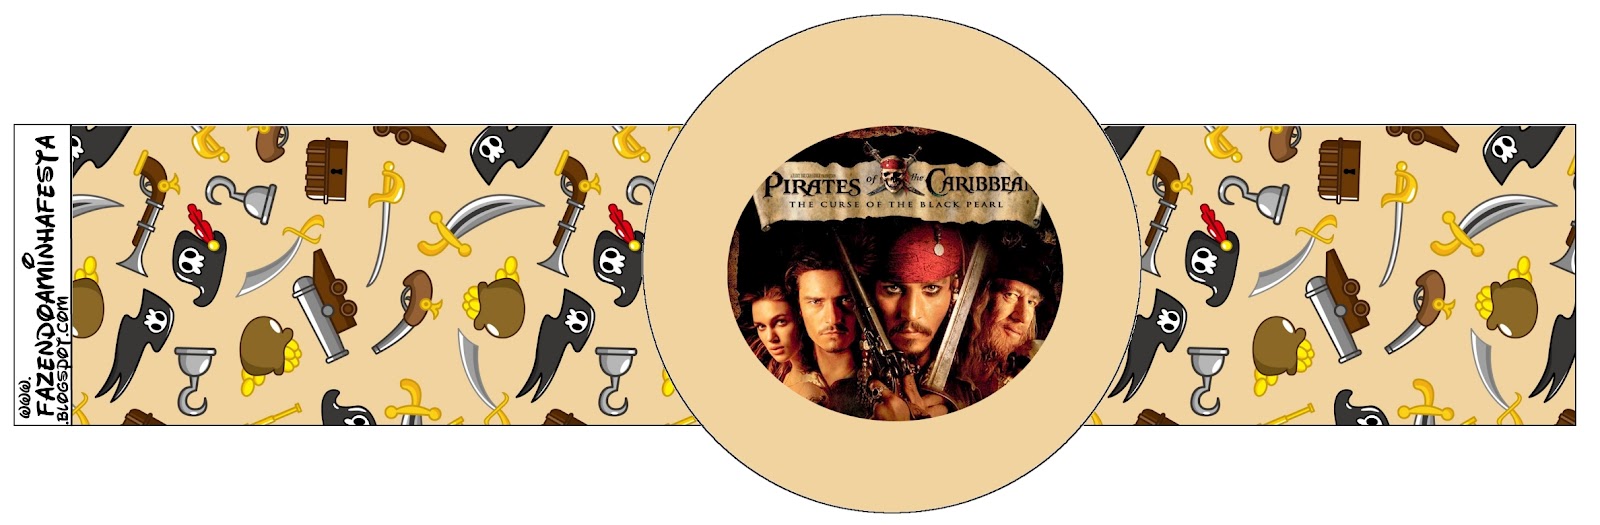 Pirates of the Caribbean: Free Party Printables, Images and Papers